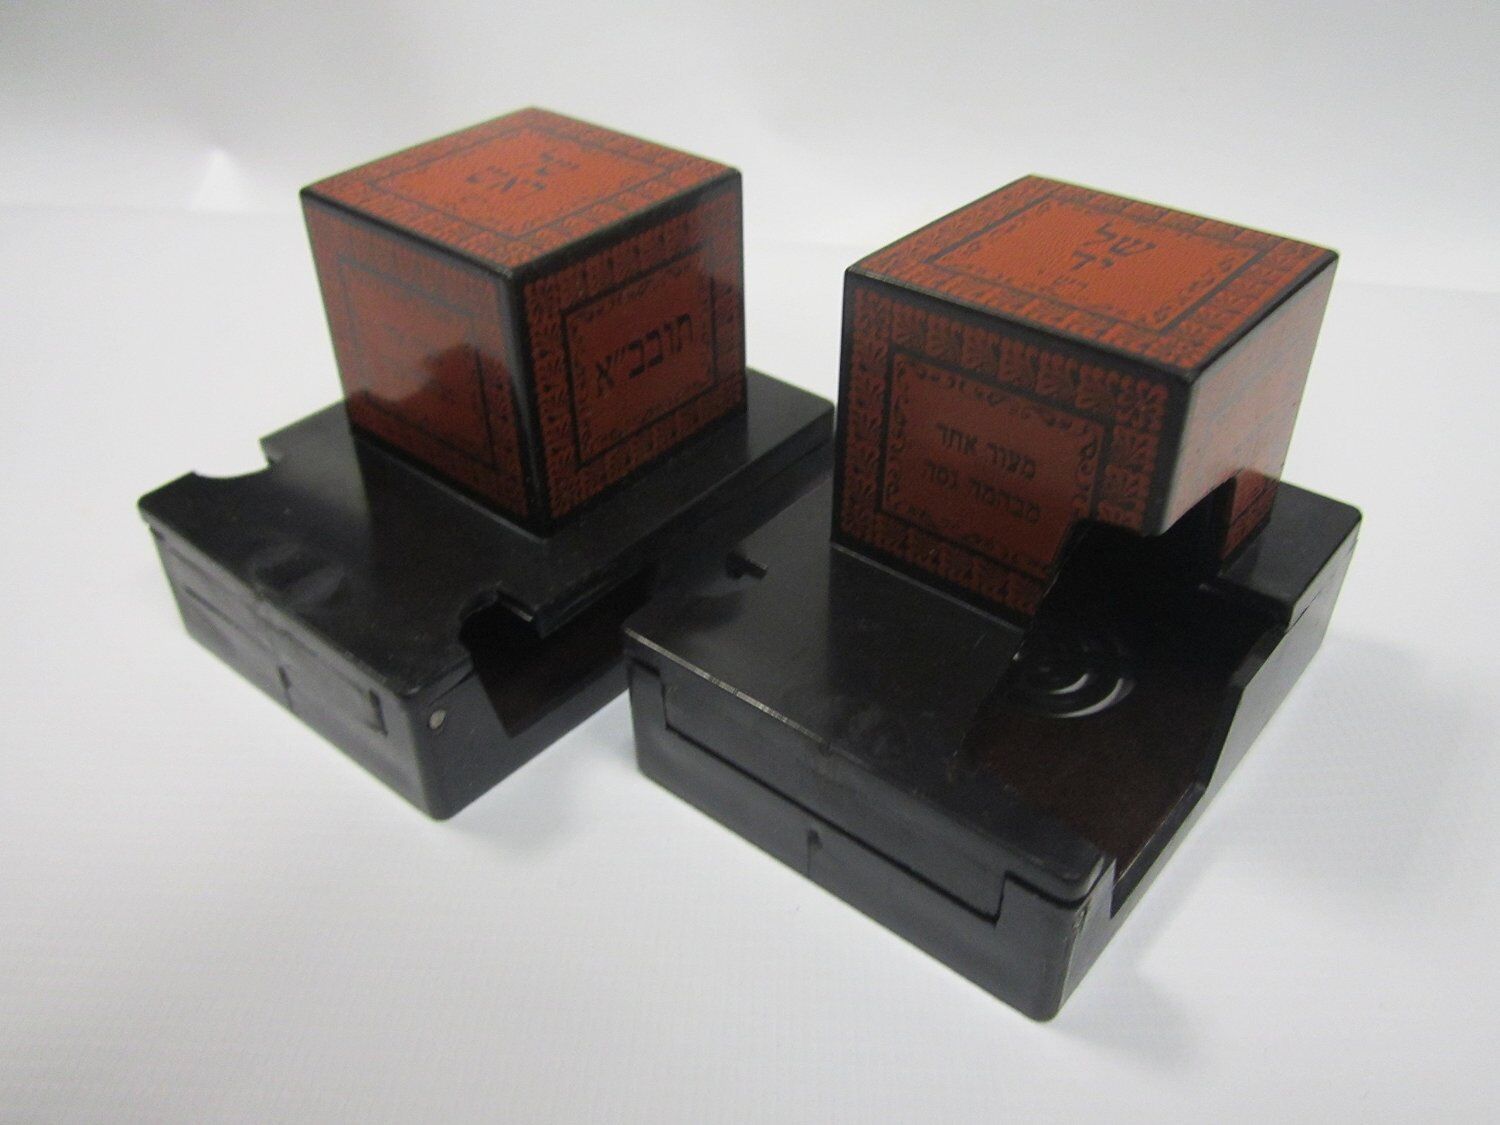 34 Millimeter Red Top Plastic Tefillin Boxes Set,for Right Handend, Rashi 